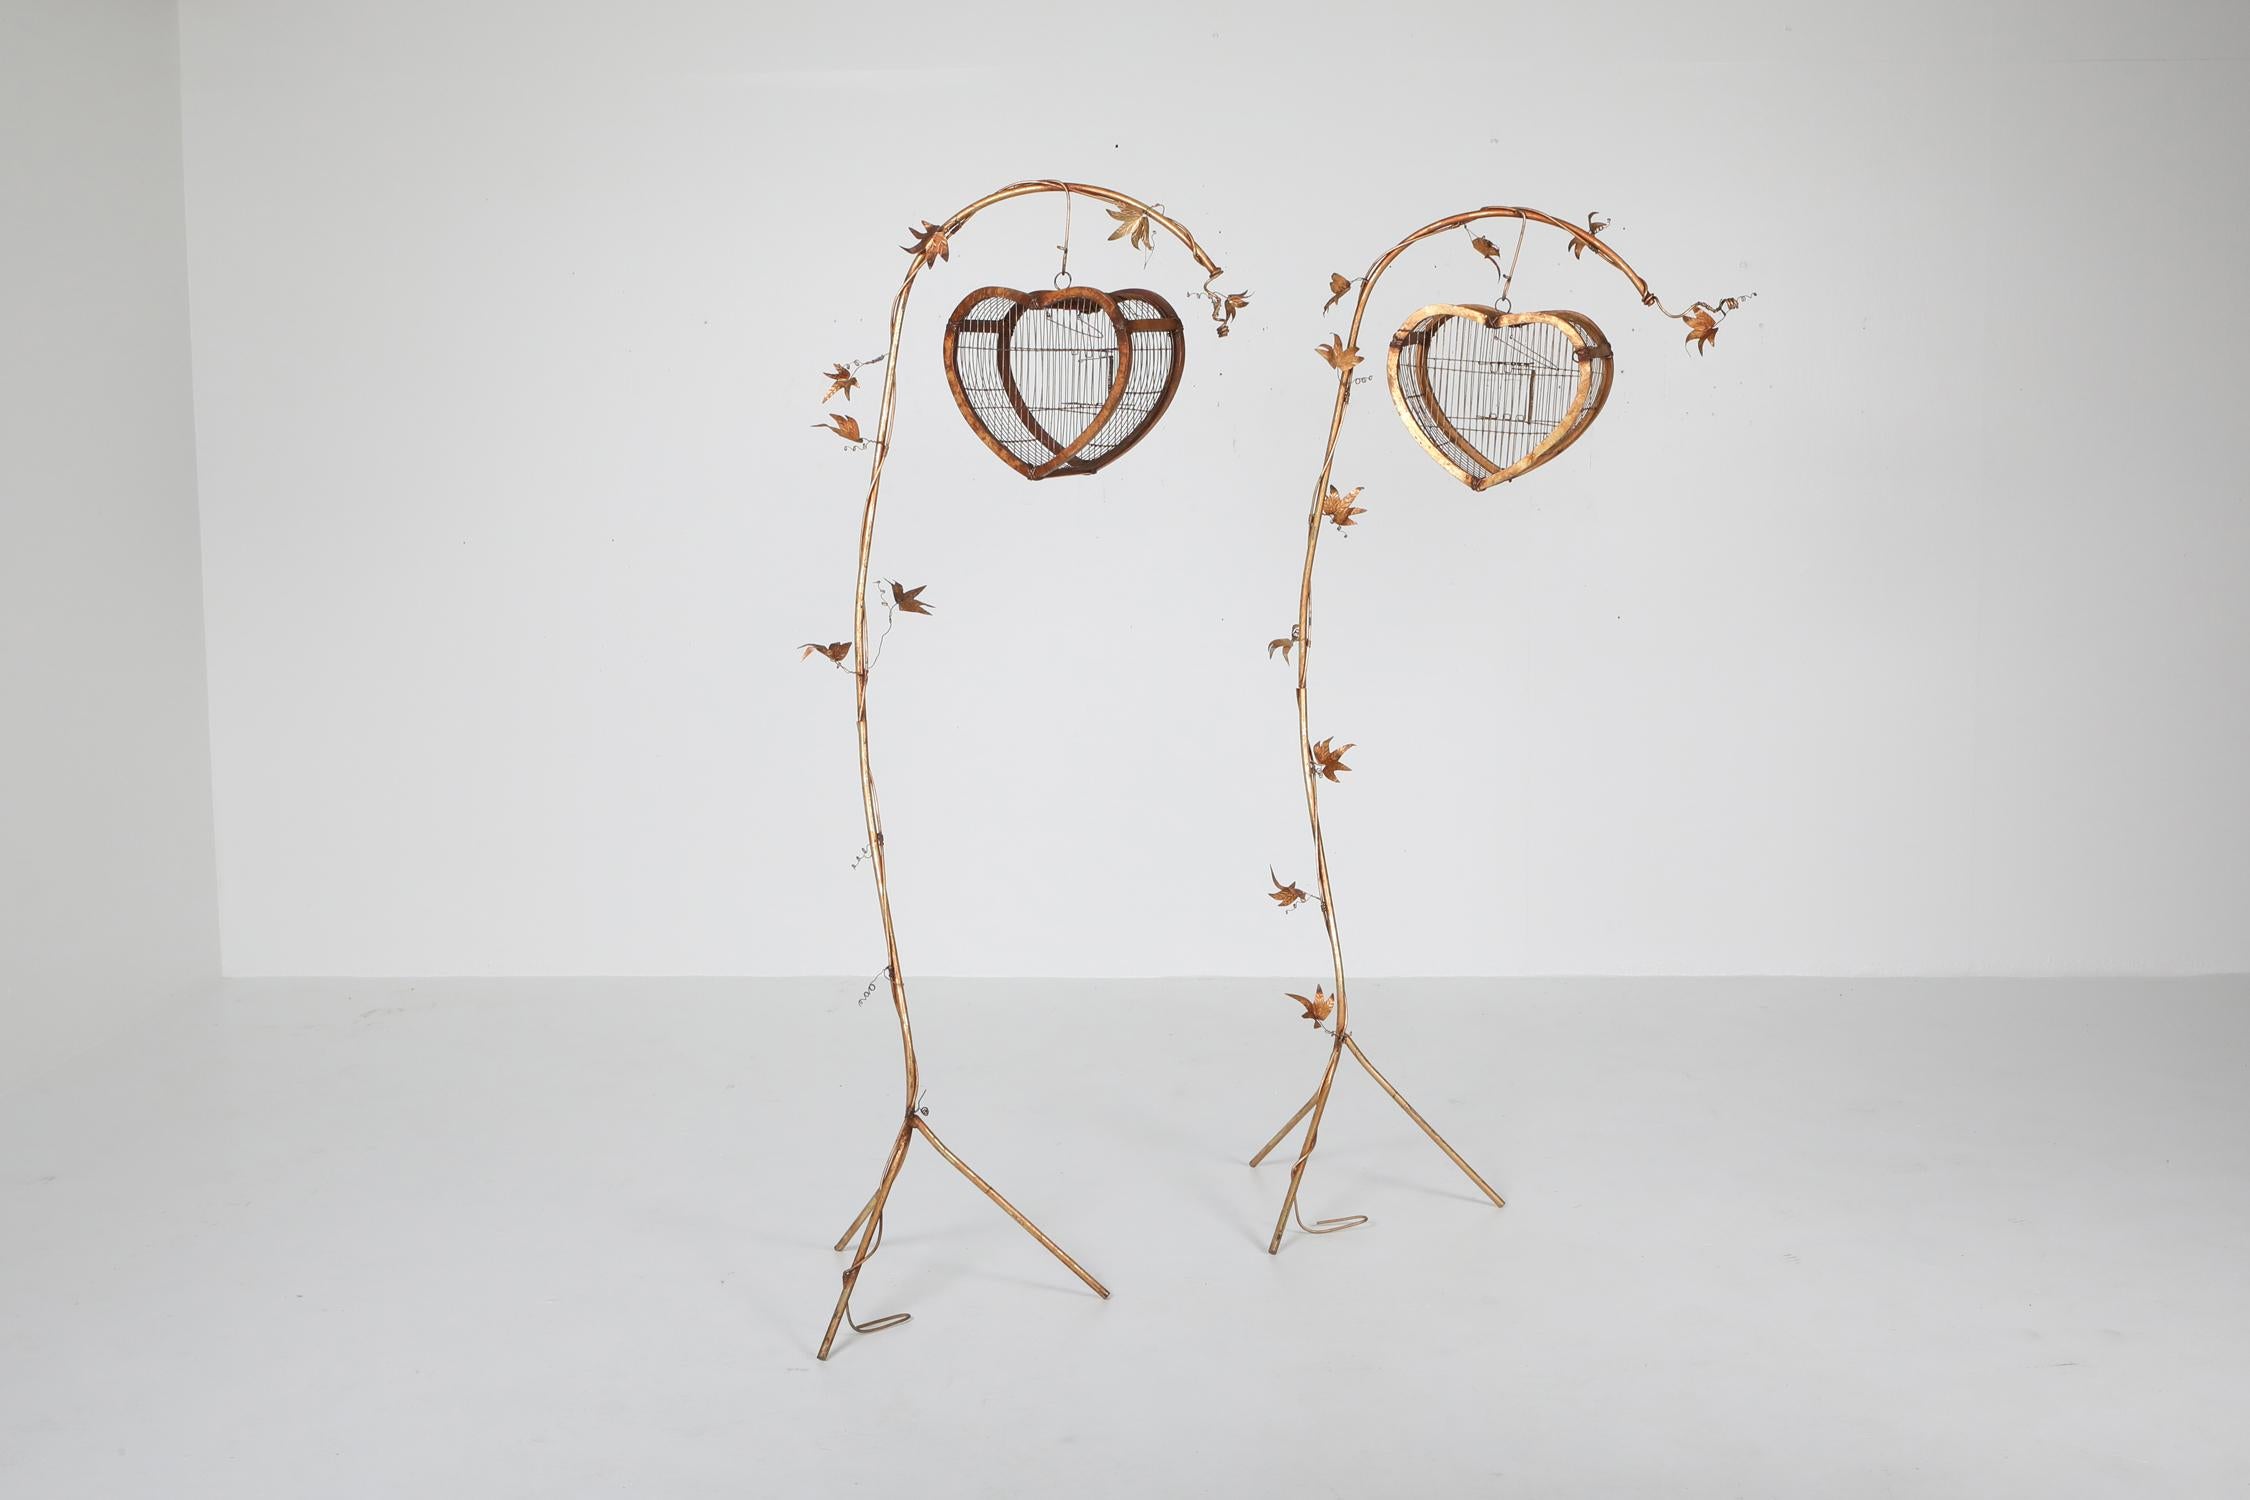 Decorative pair of birdcage stands, Brussels, 1970s

Bespoke pieces designed for a Brussels store in the seventies.
Romantic pair of birdcage stands which carry some Art Nouveau influences.
  